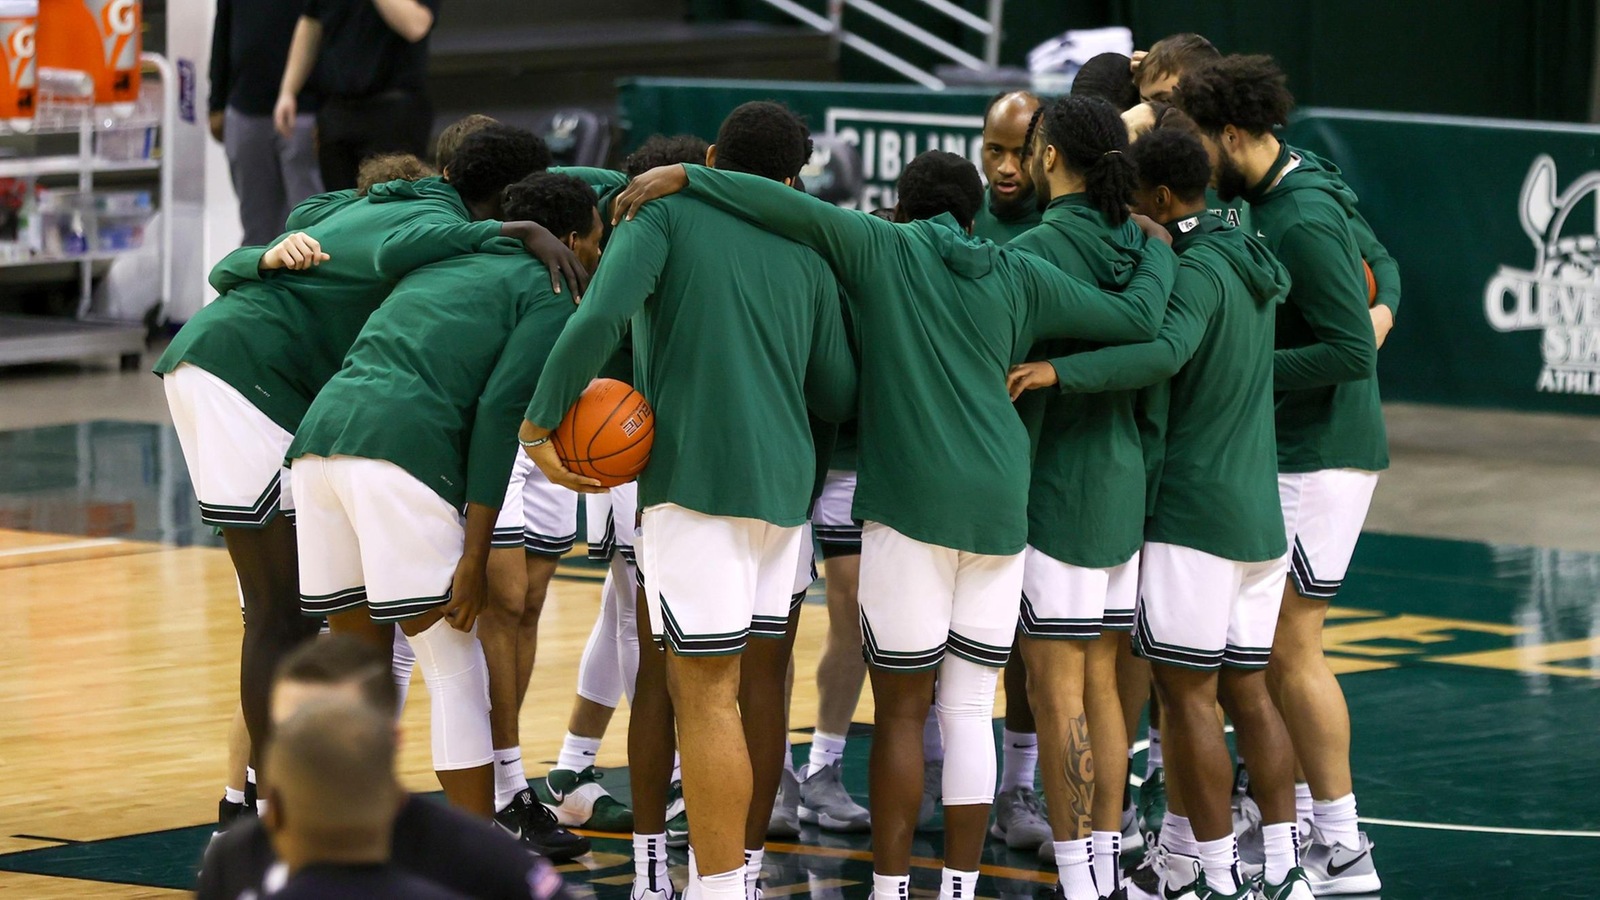 Cleveland State to Face Off Against Purdue Fort Wayne in #HLMBB Tournament Quarterfinal